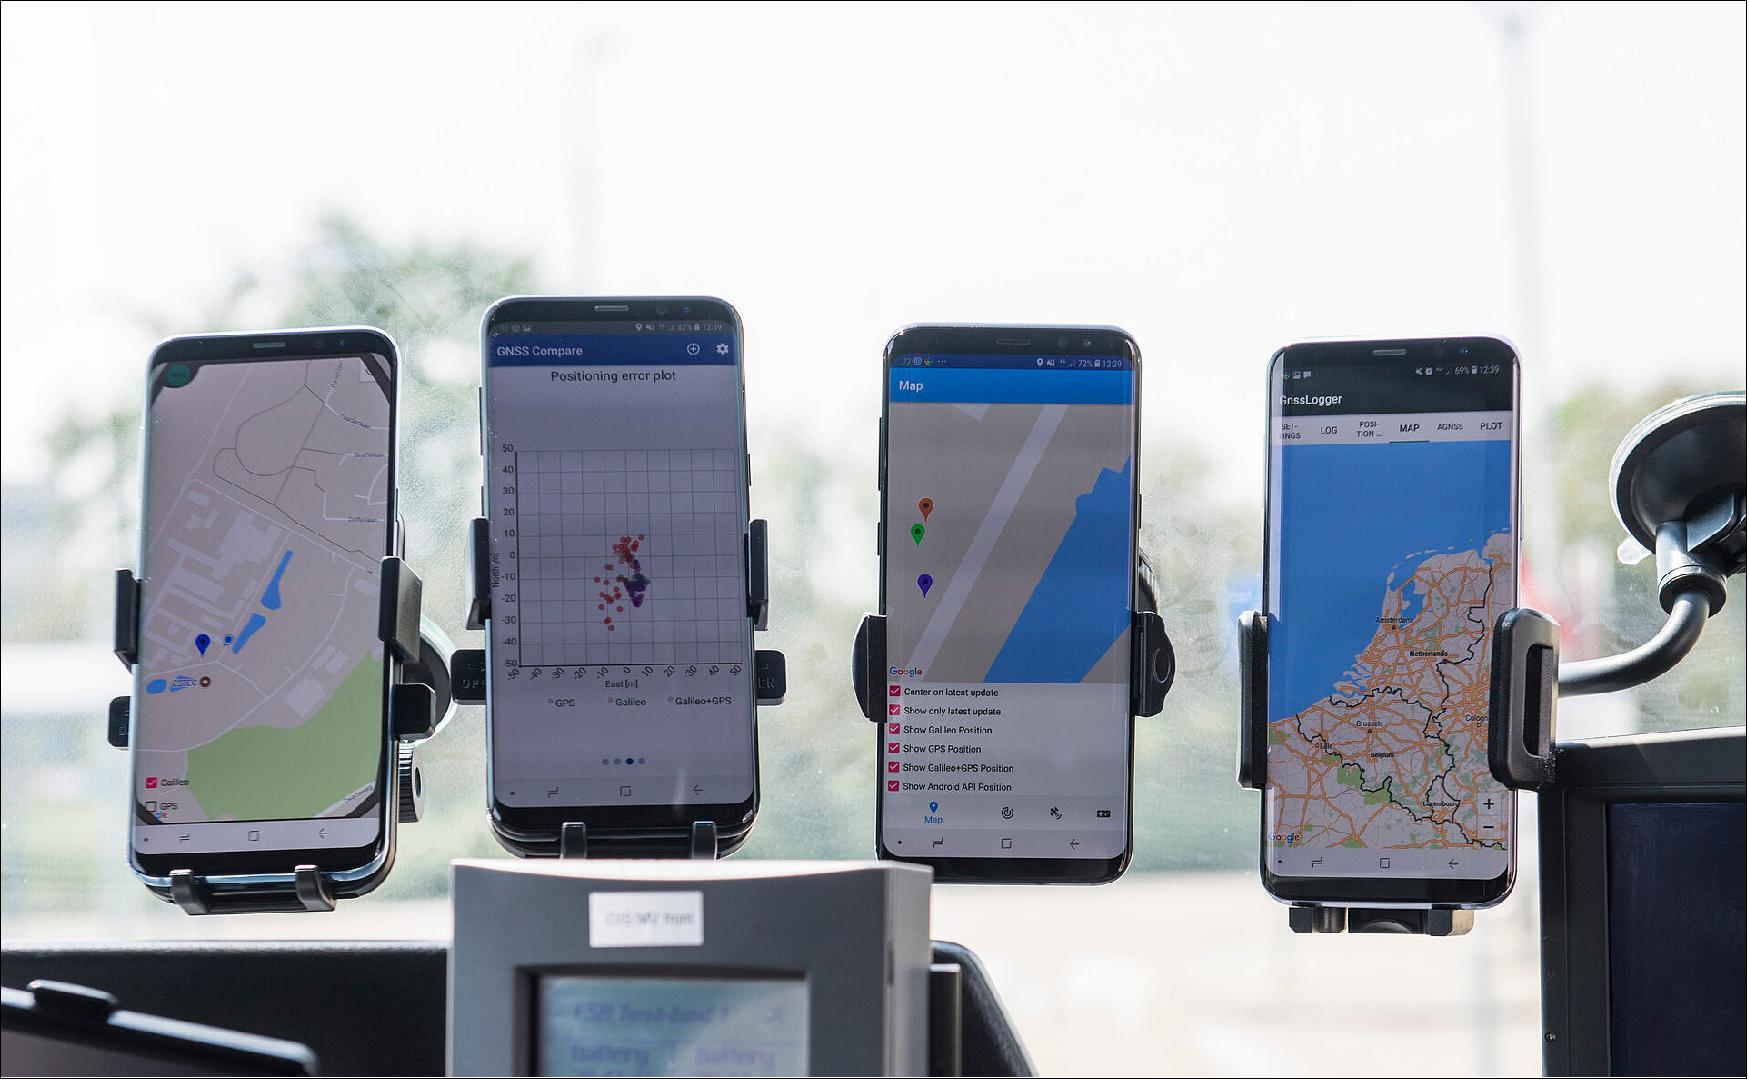 Figure 5: A team from ESA's Radio Navigation section and the Navigation Directorate performed testing of the three Galileo smartphone apps developed by ESA trainees for the inaugural ESA Galileo smartphone app competition in 2018 (image credit: ESA–G. Porter, CC BY-SA 3.0 IGO)